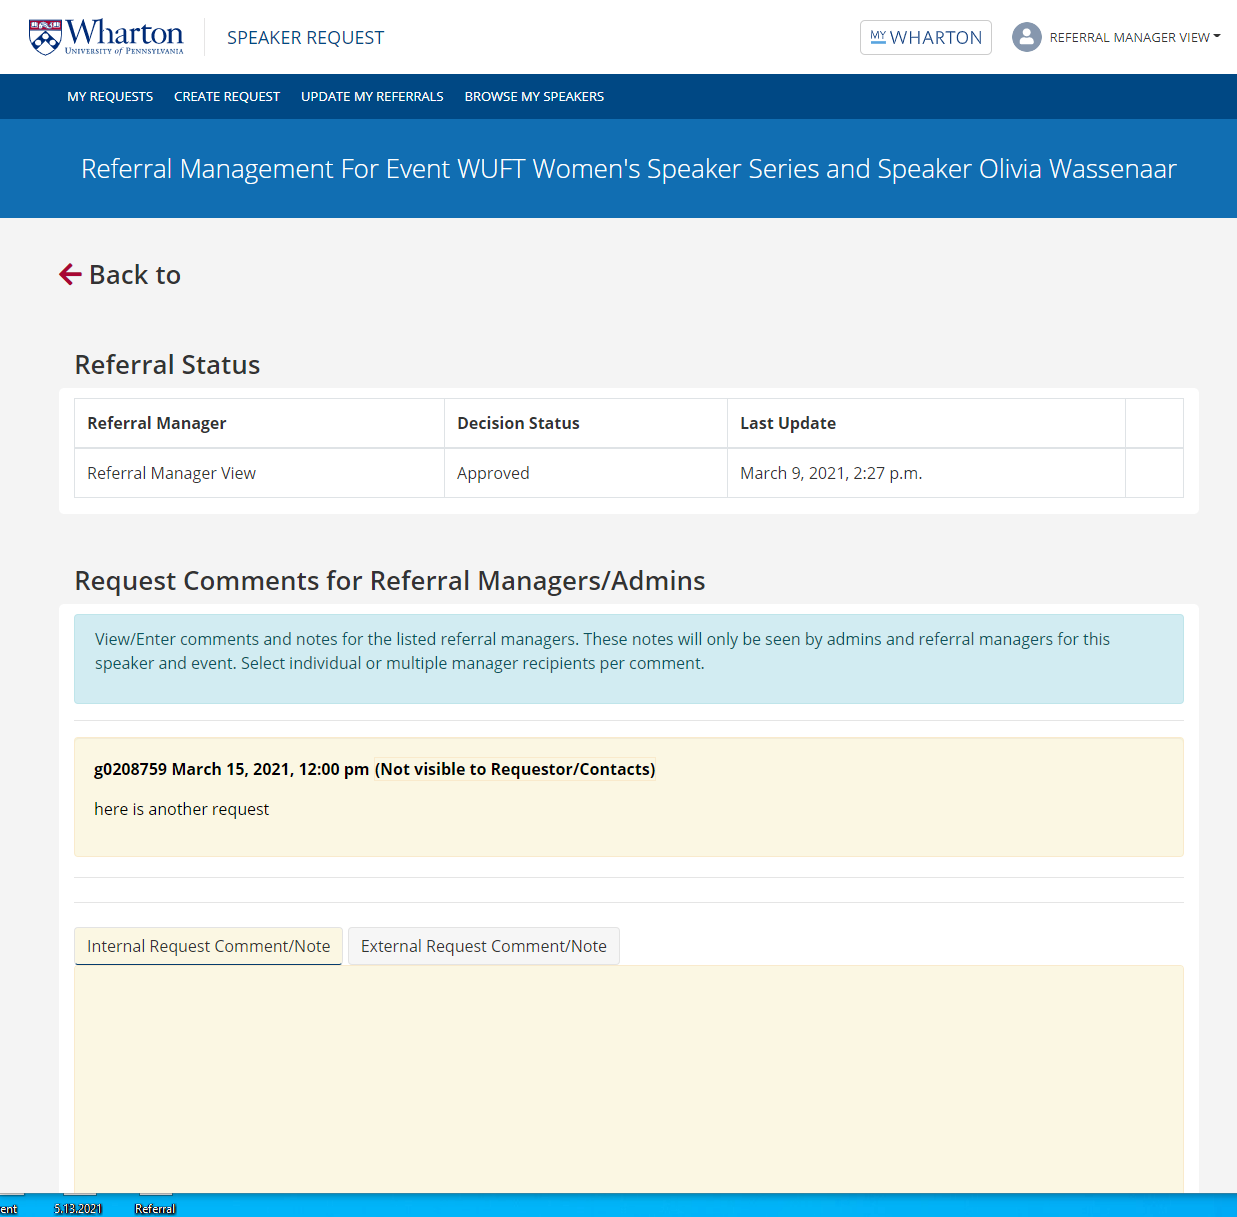 request comments page - internal and external comments